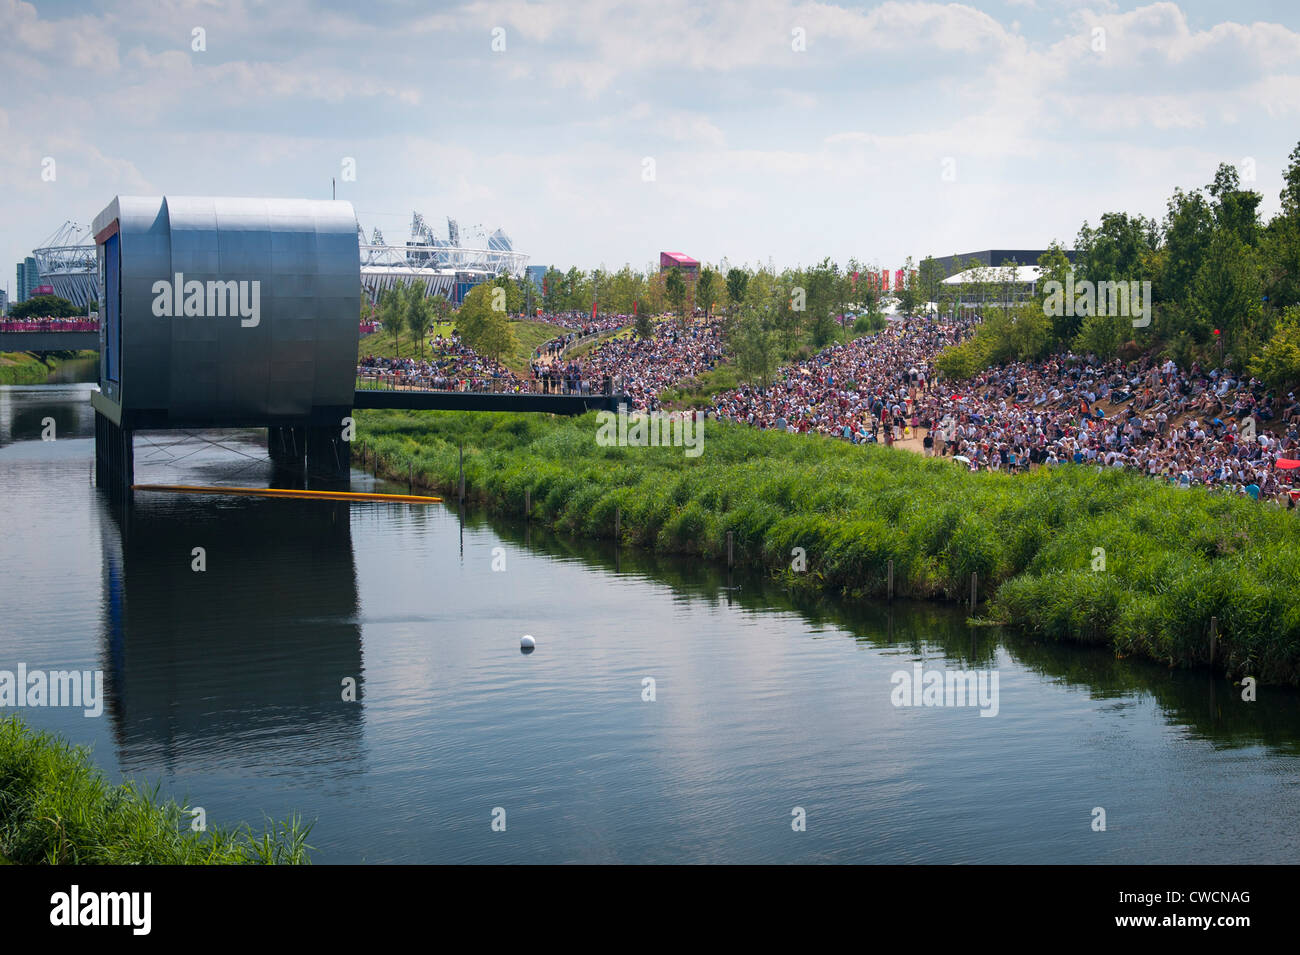 London 2012 Stratford Olympic Park BA British Airways Park Live West venue giant screen screens spectators grass bank water Stock Photo